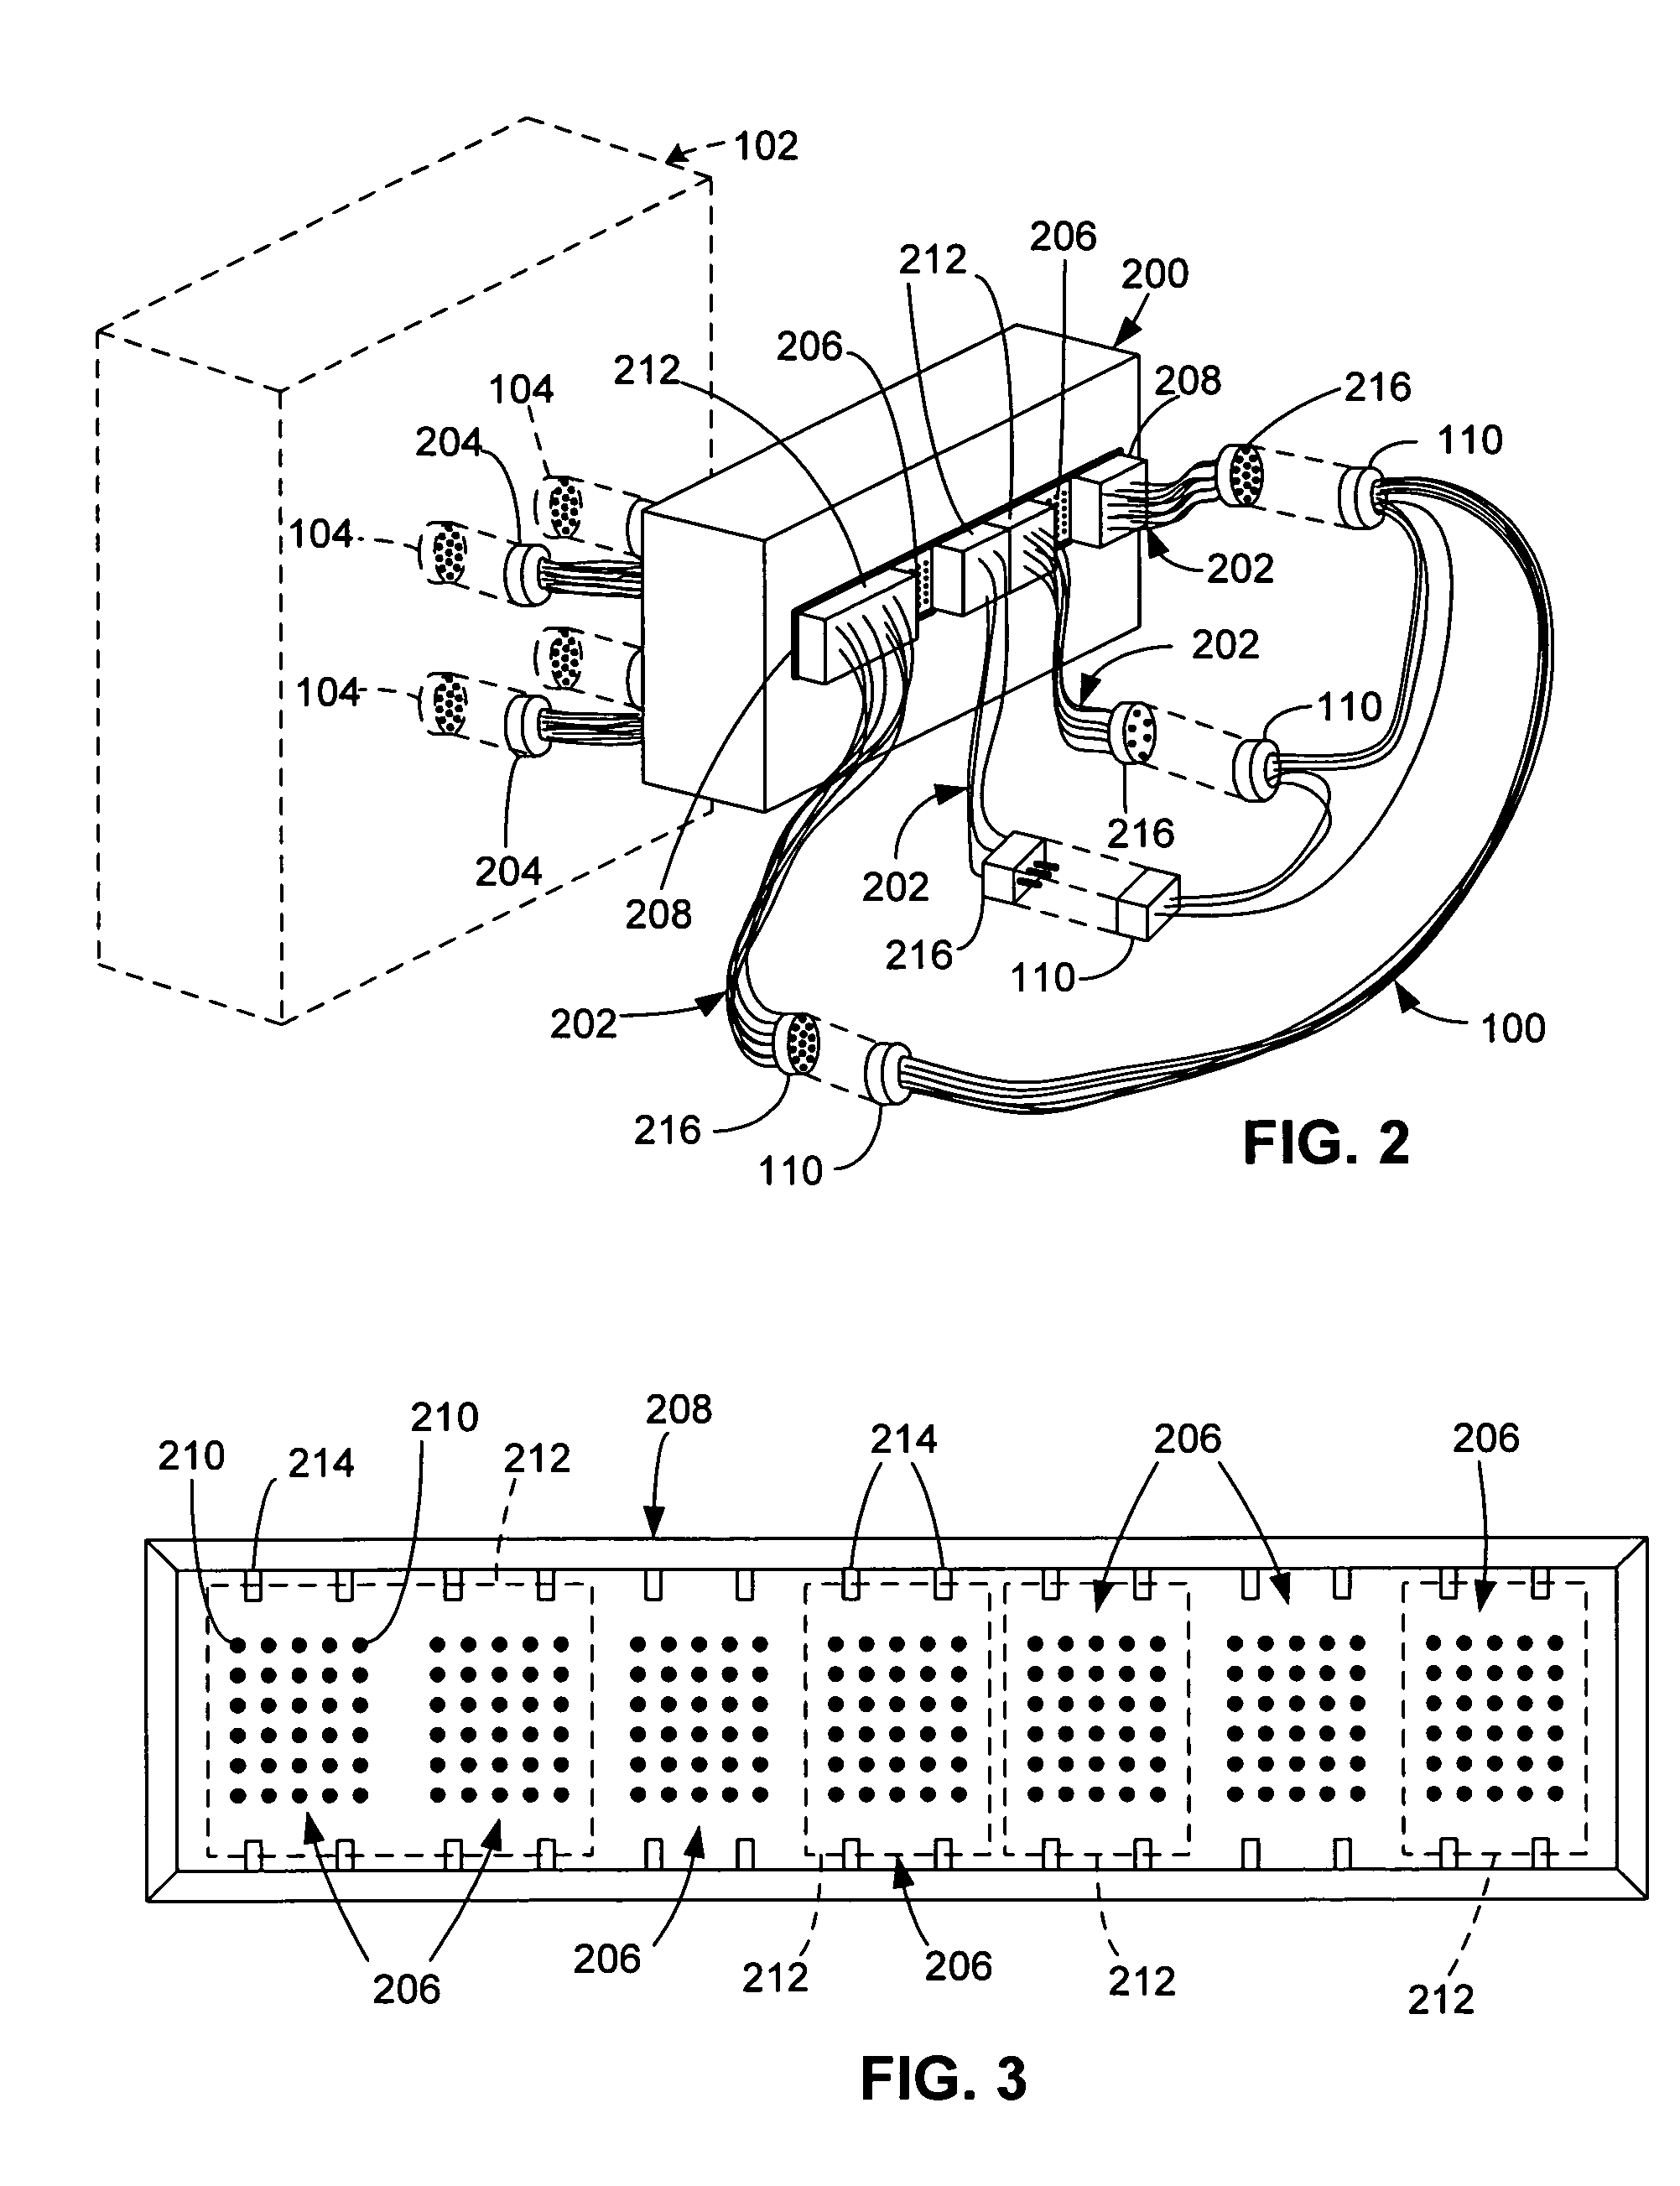 Electrical interconnect interface and wire harness test and test development system and method